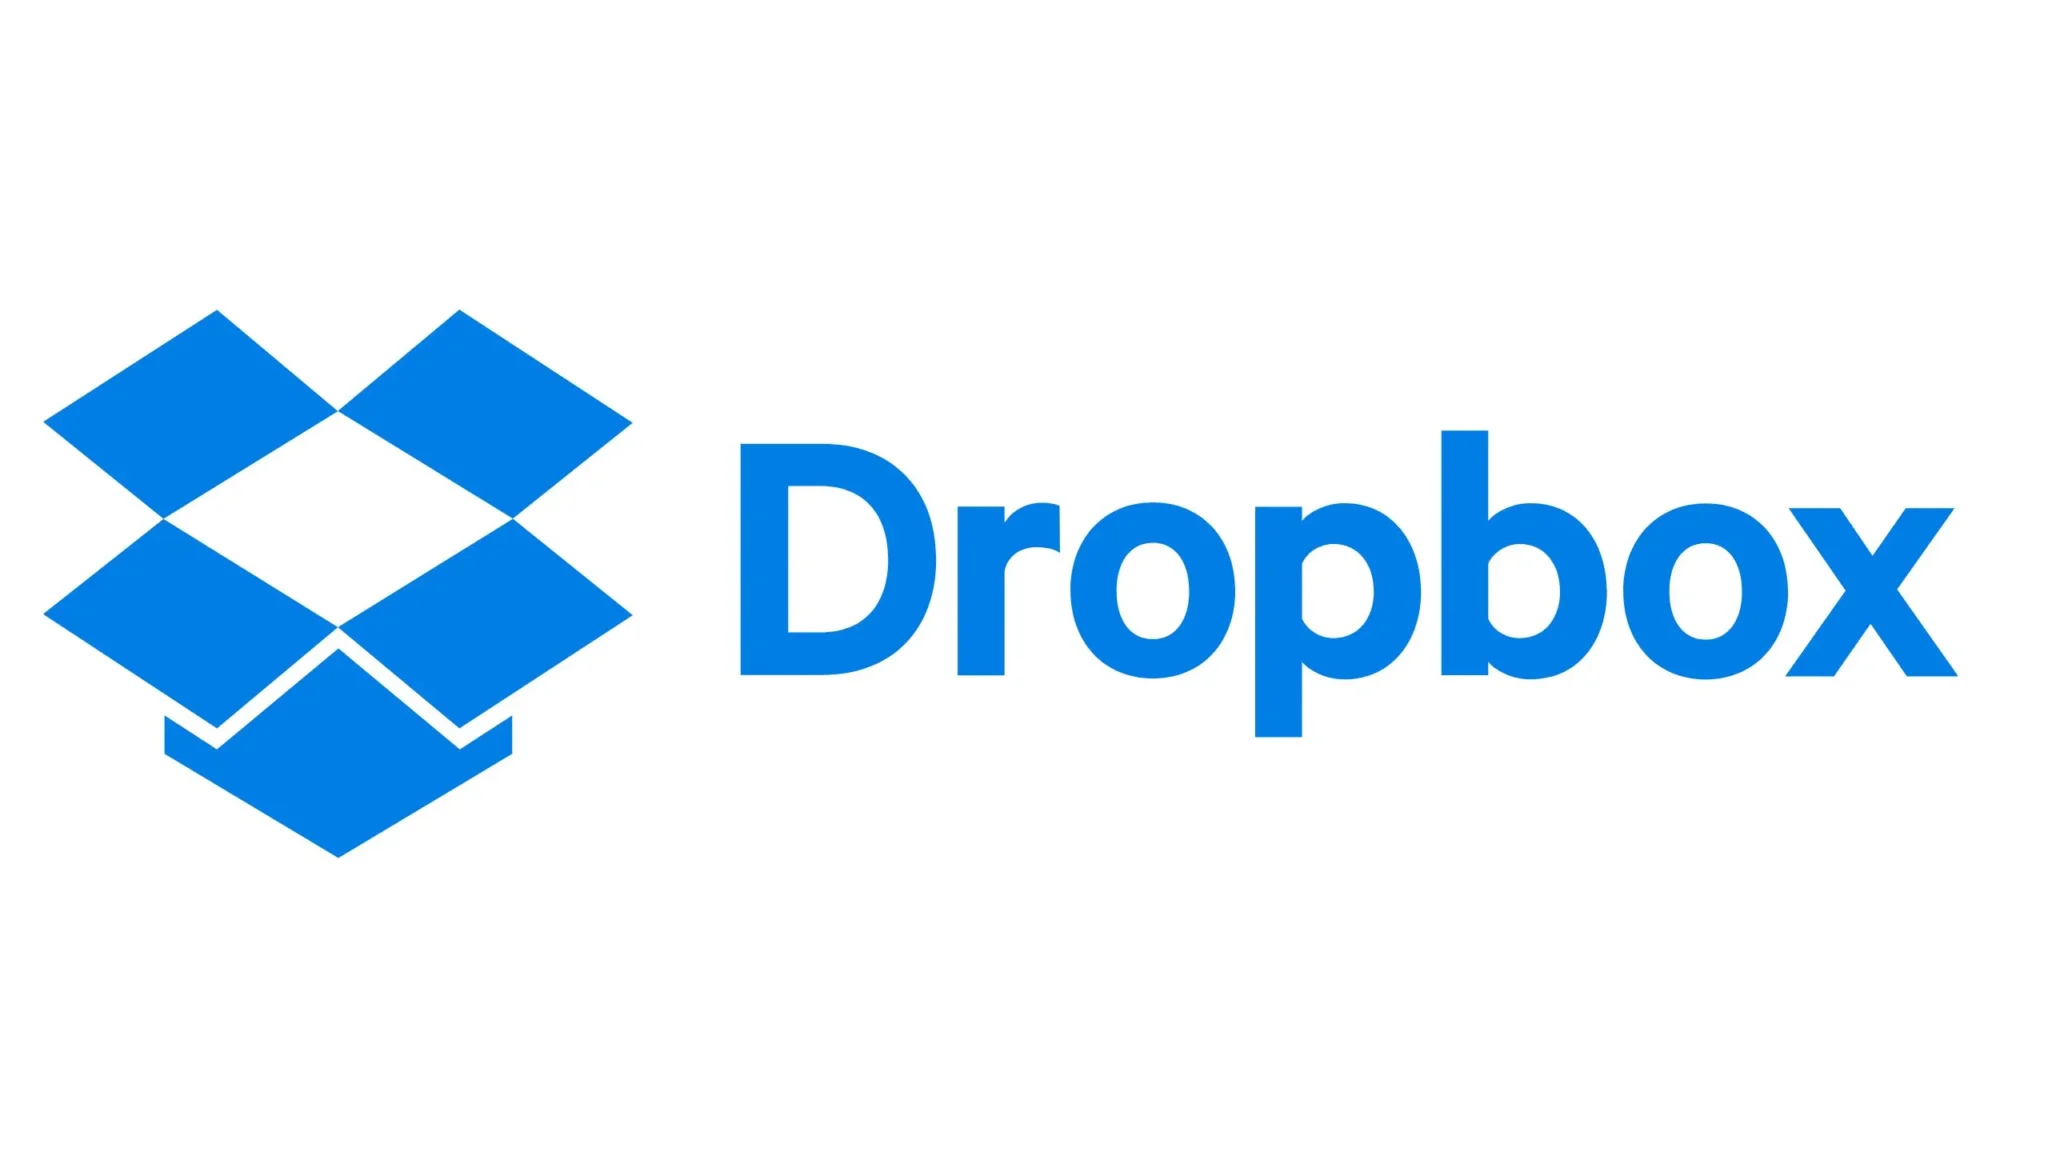 What Is The Best Way To Recover Dropbox Account Without Email In 2022